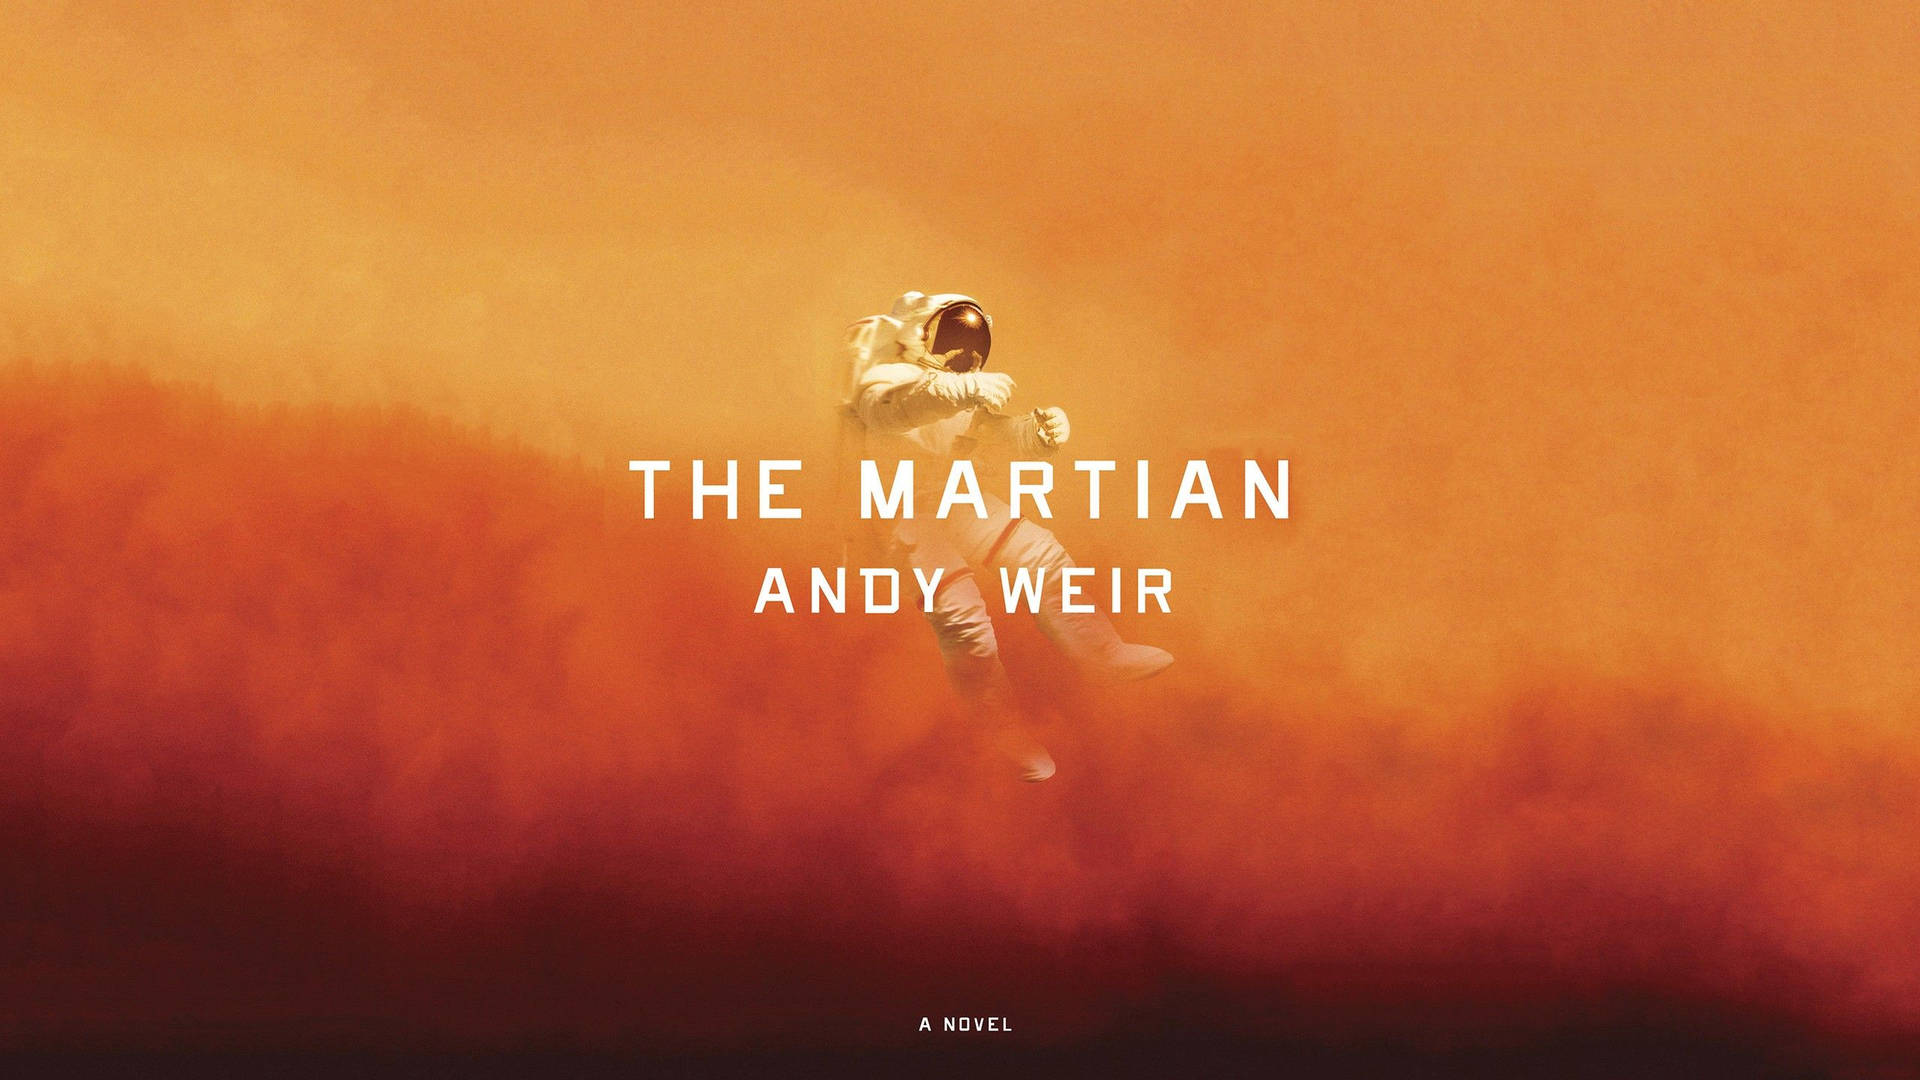 The Martian Andy Weir Book Cover Background